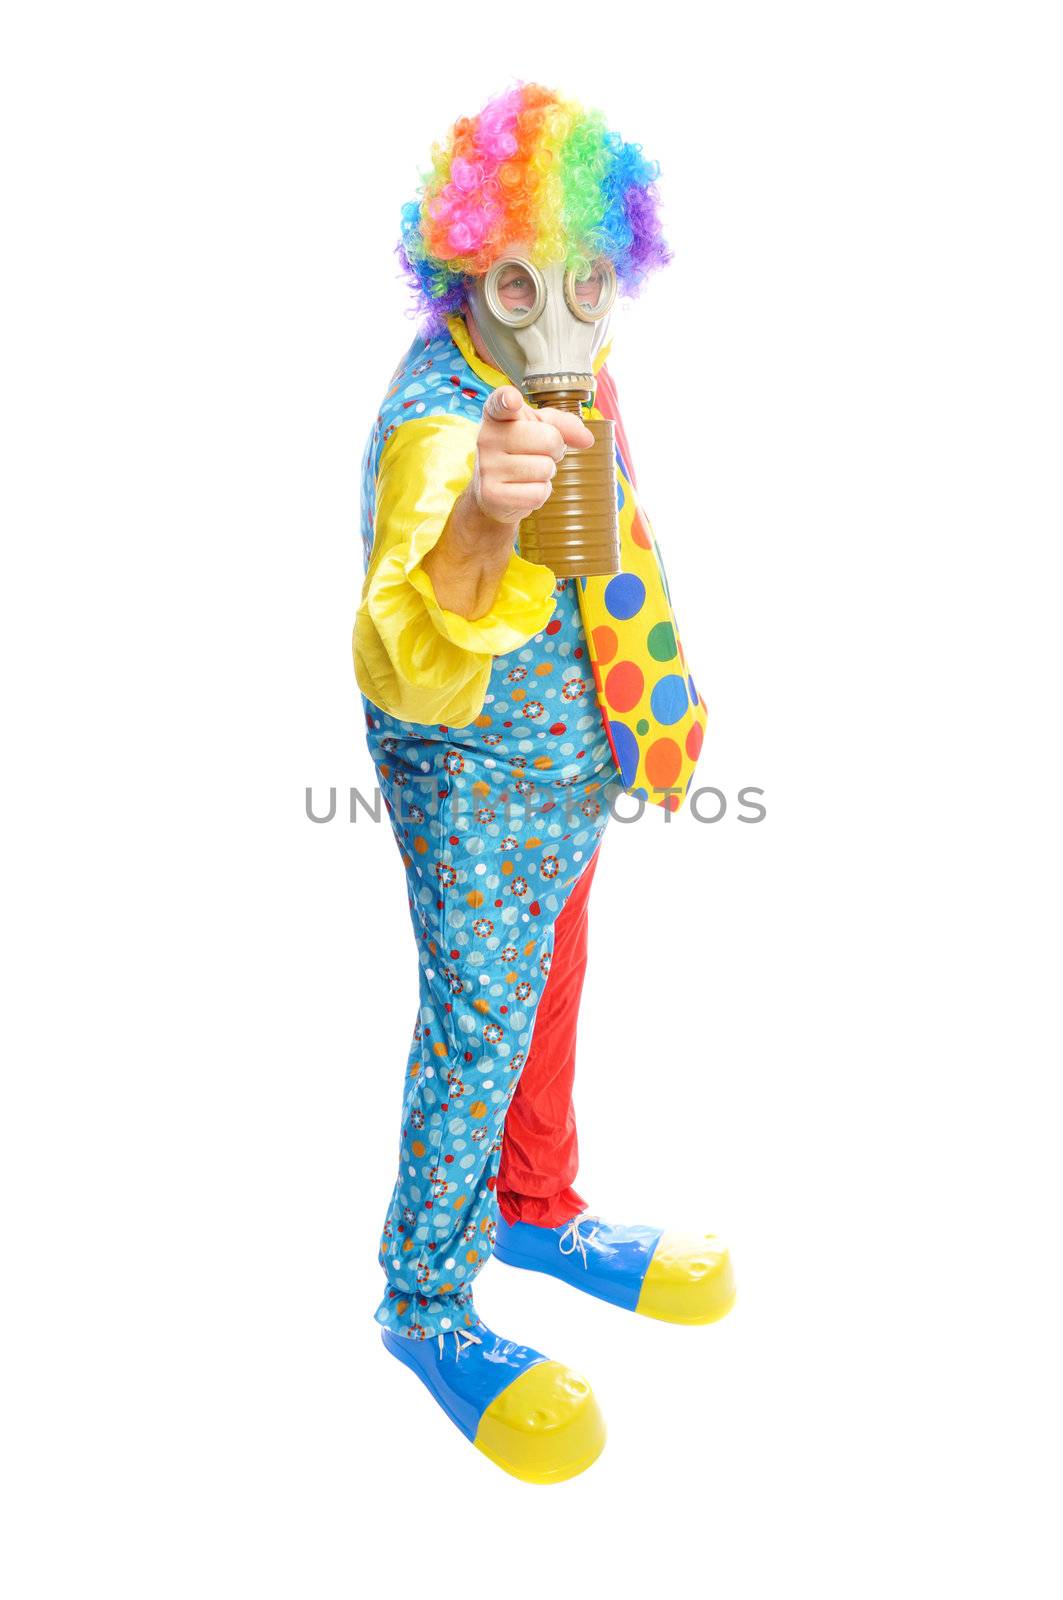 Some clownwearing a gas mask by PDImages